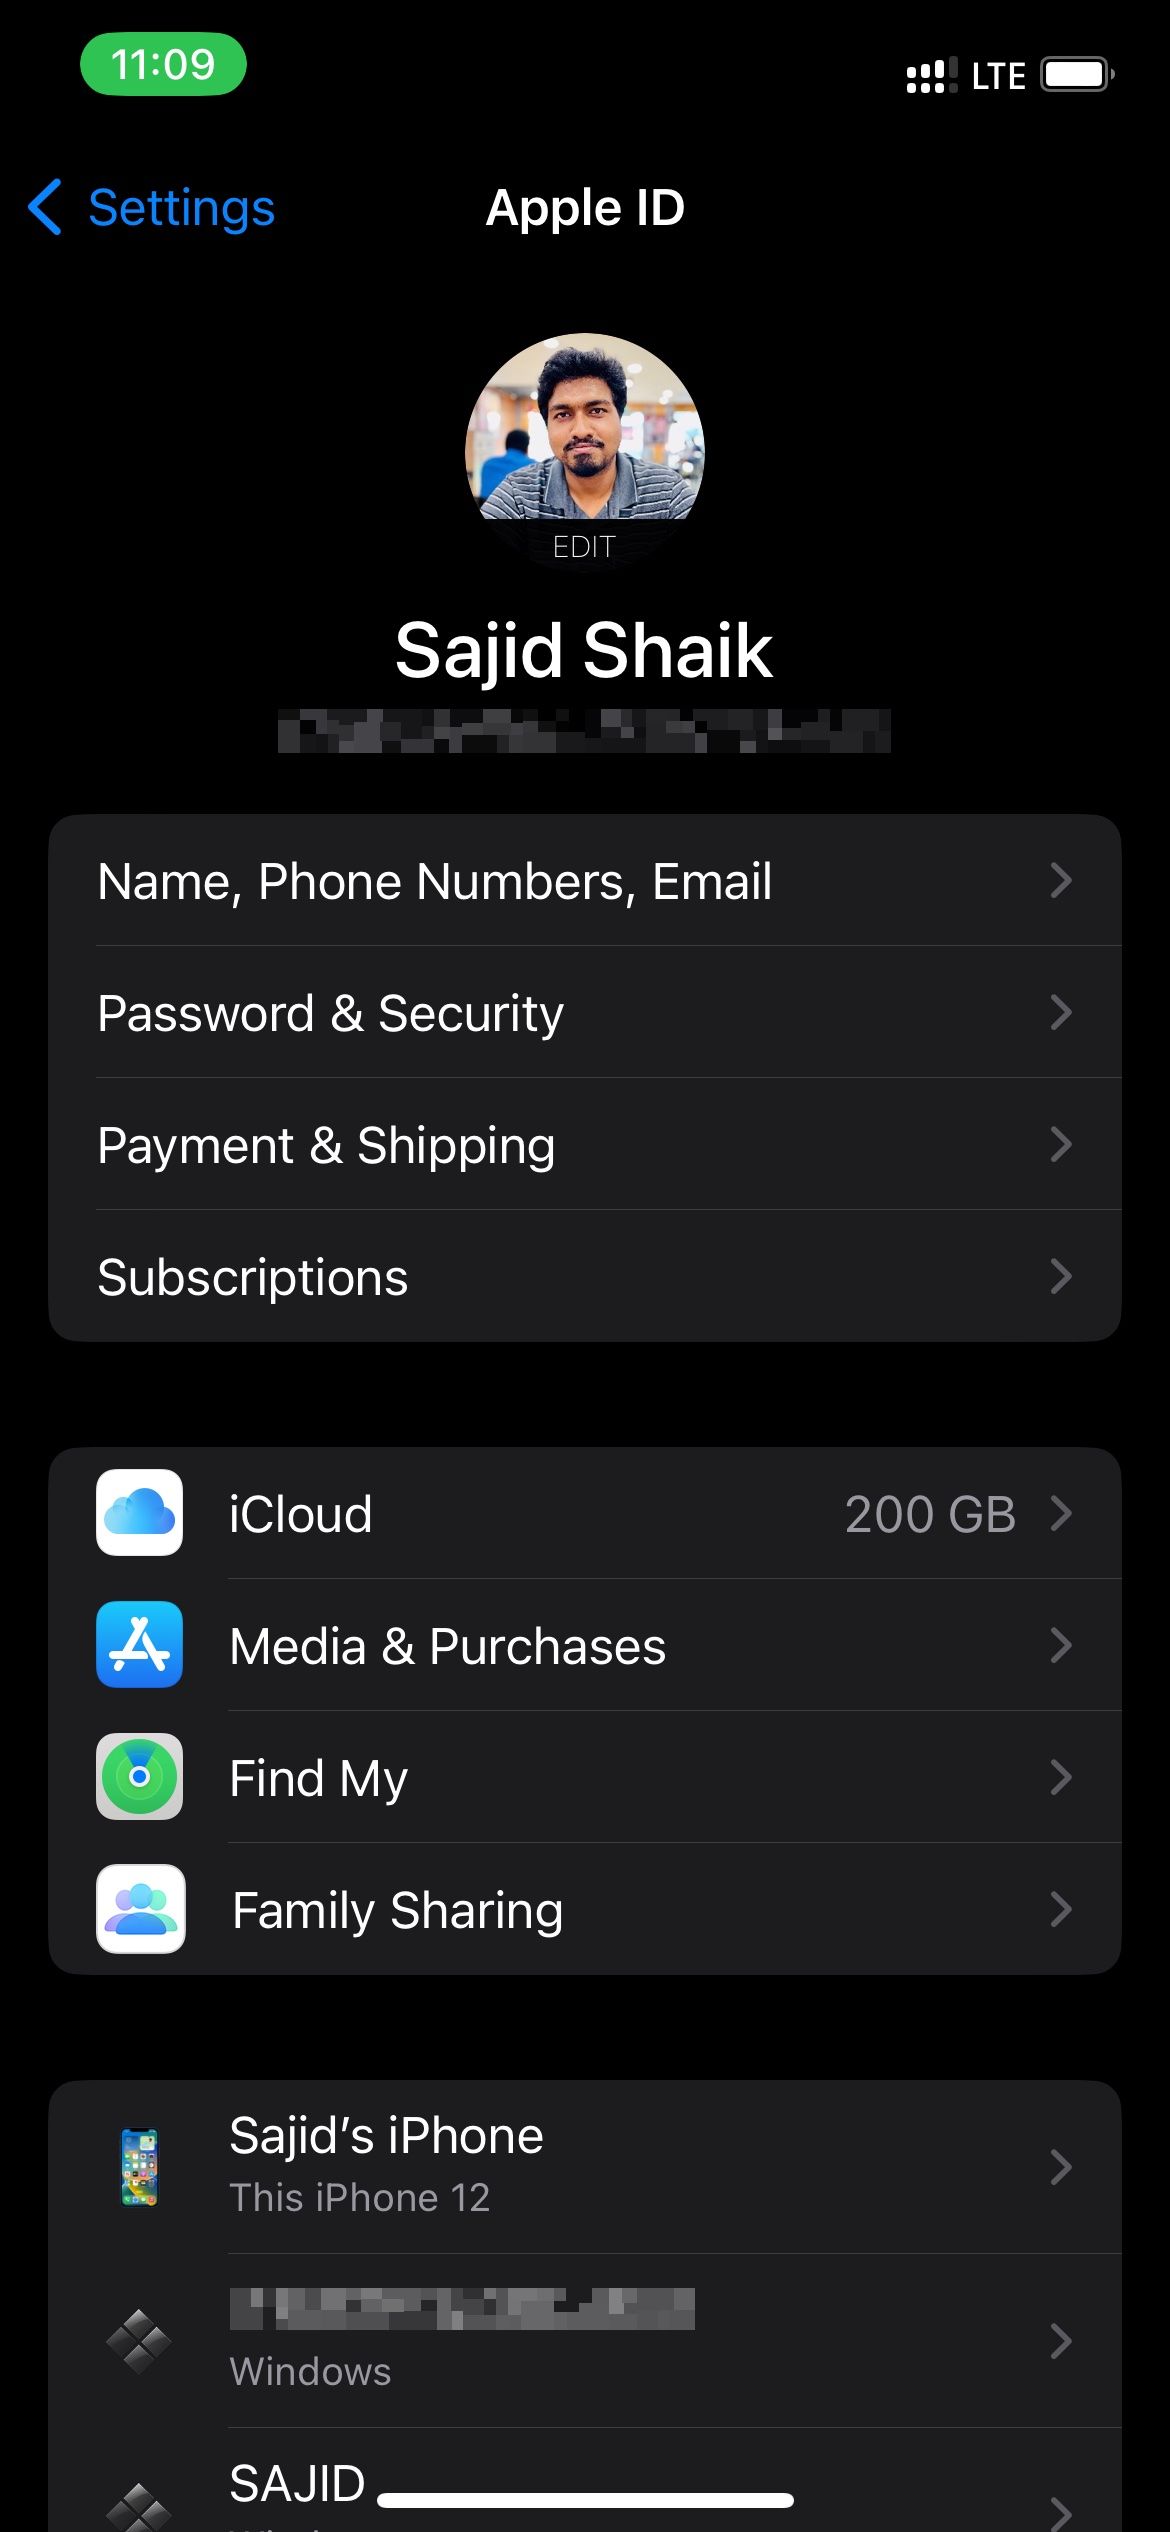 Select iCloud from Apple ID settings on iPhone